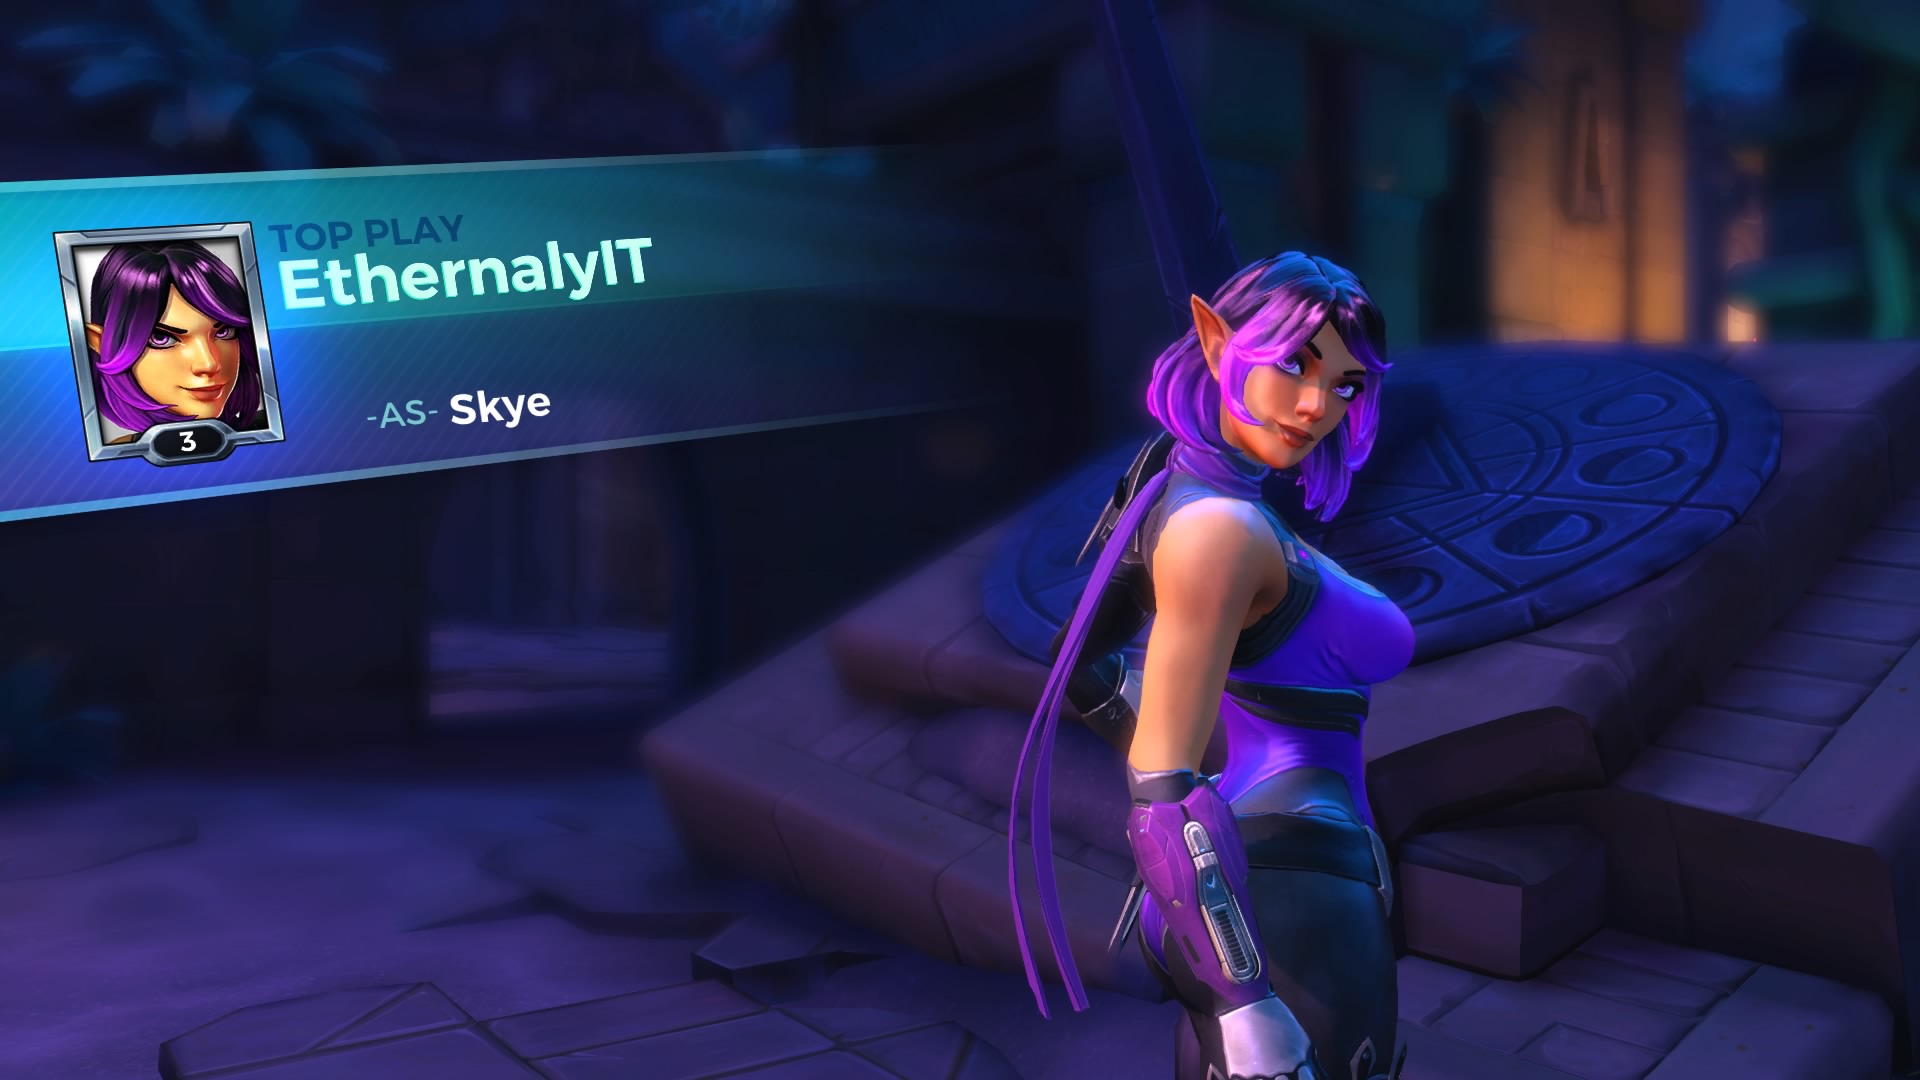 Ethernaly.it - Paladins PS4, Skye top play